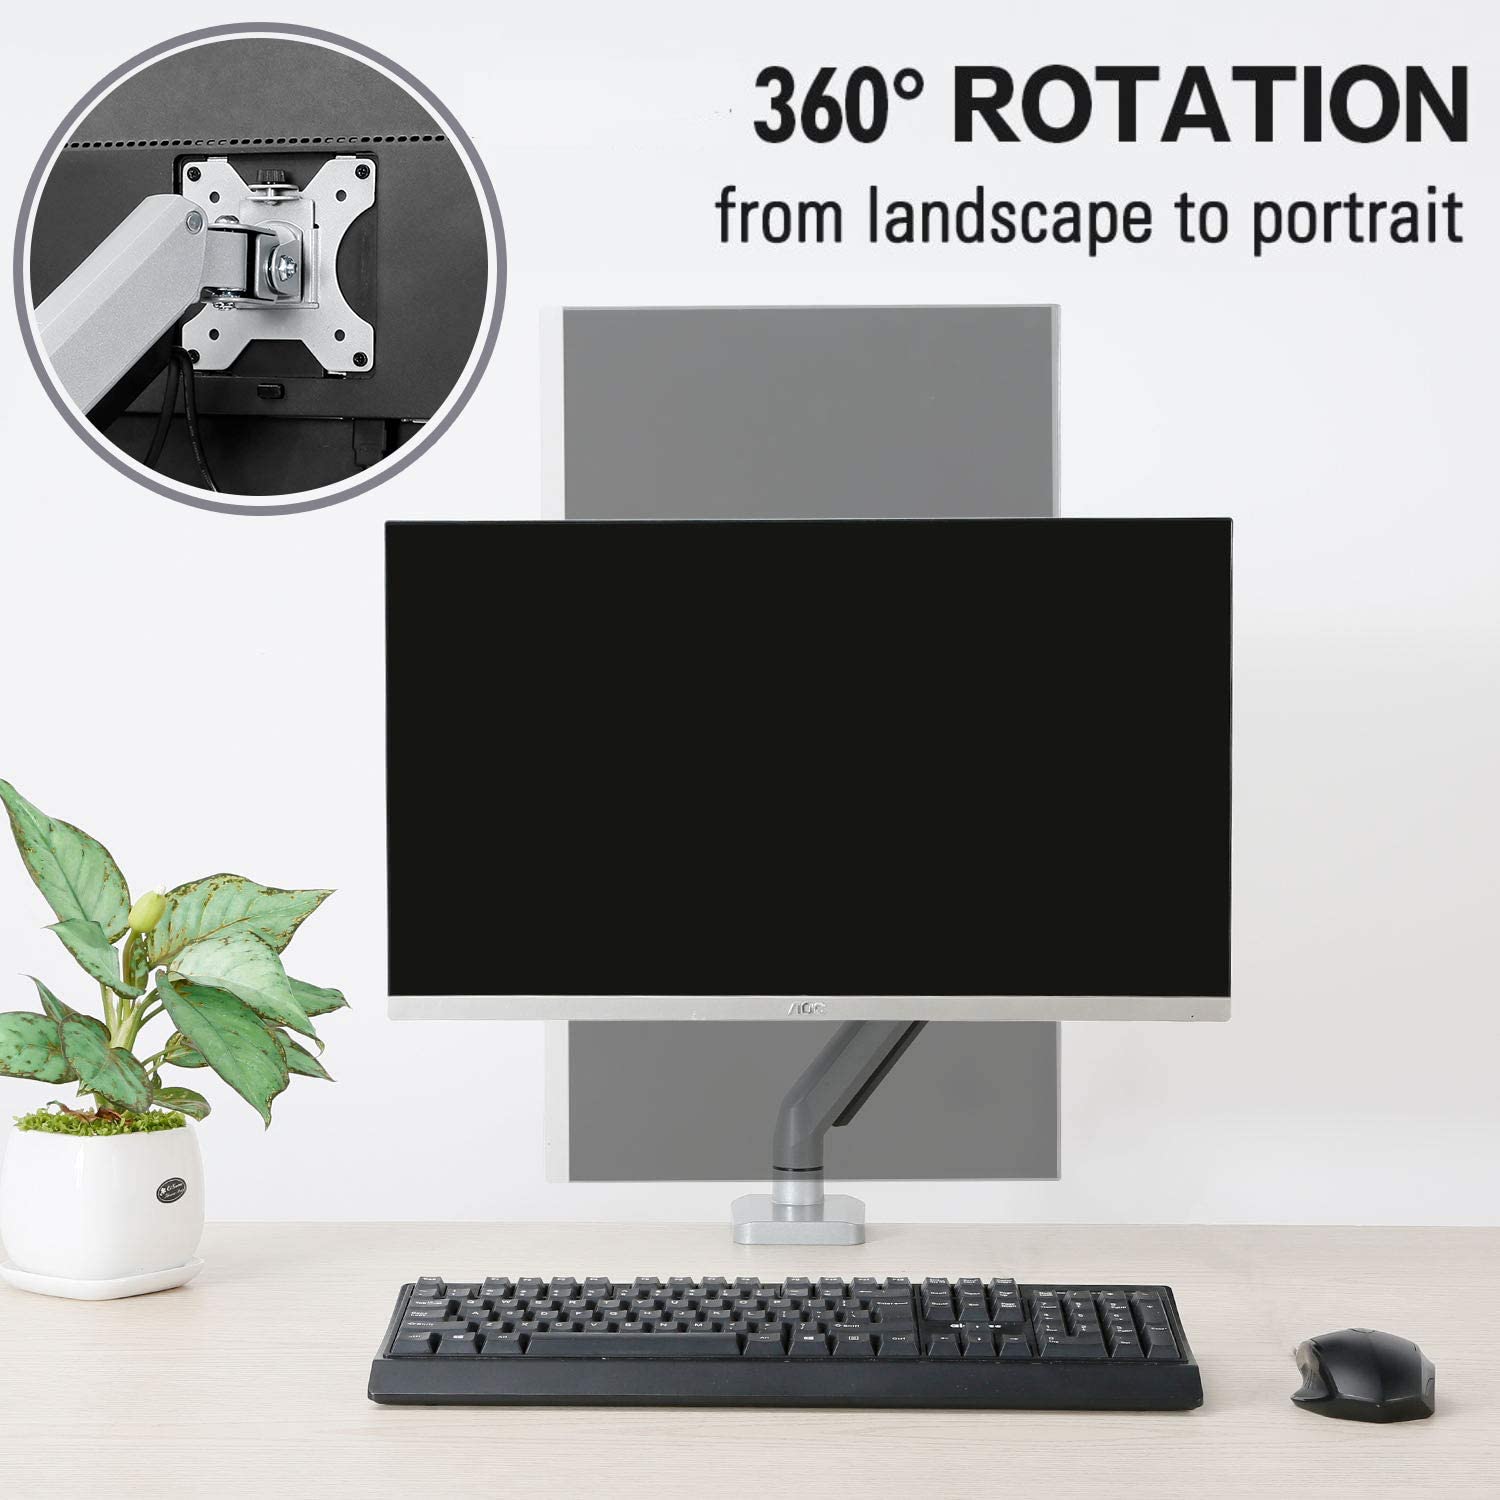 single monitor arm with 360° rotation for landscape and portrait modes